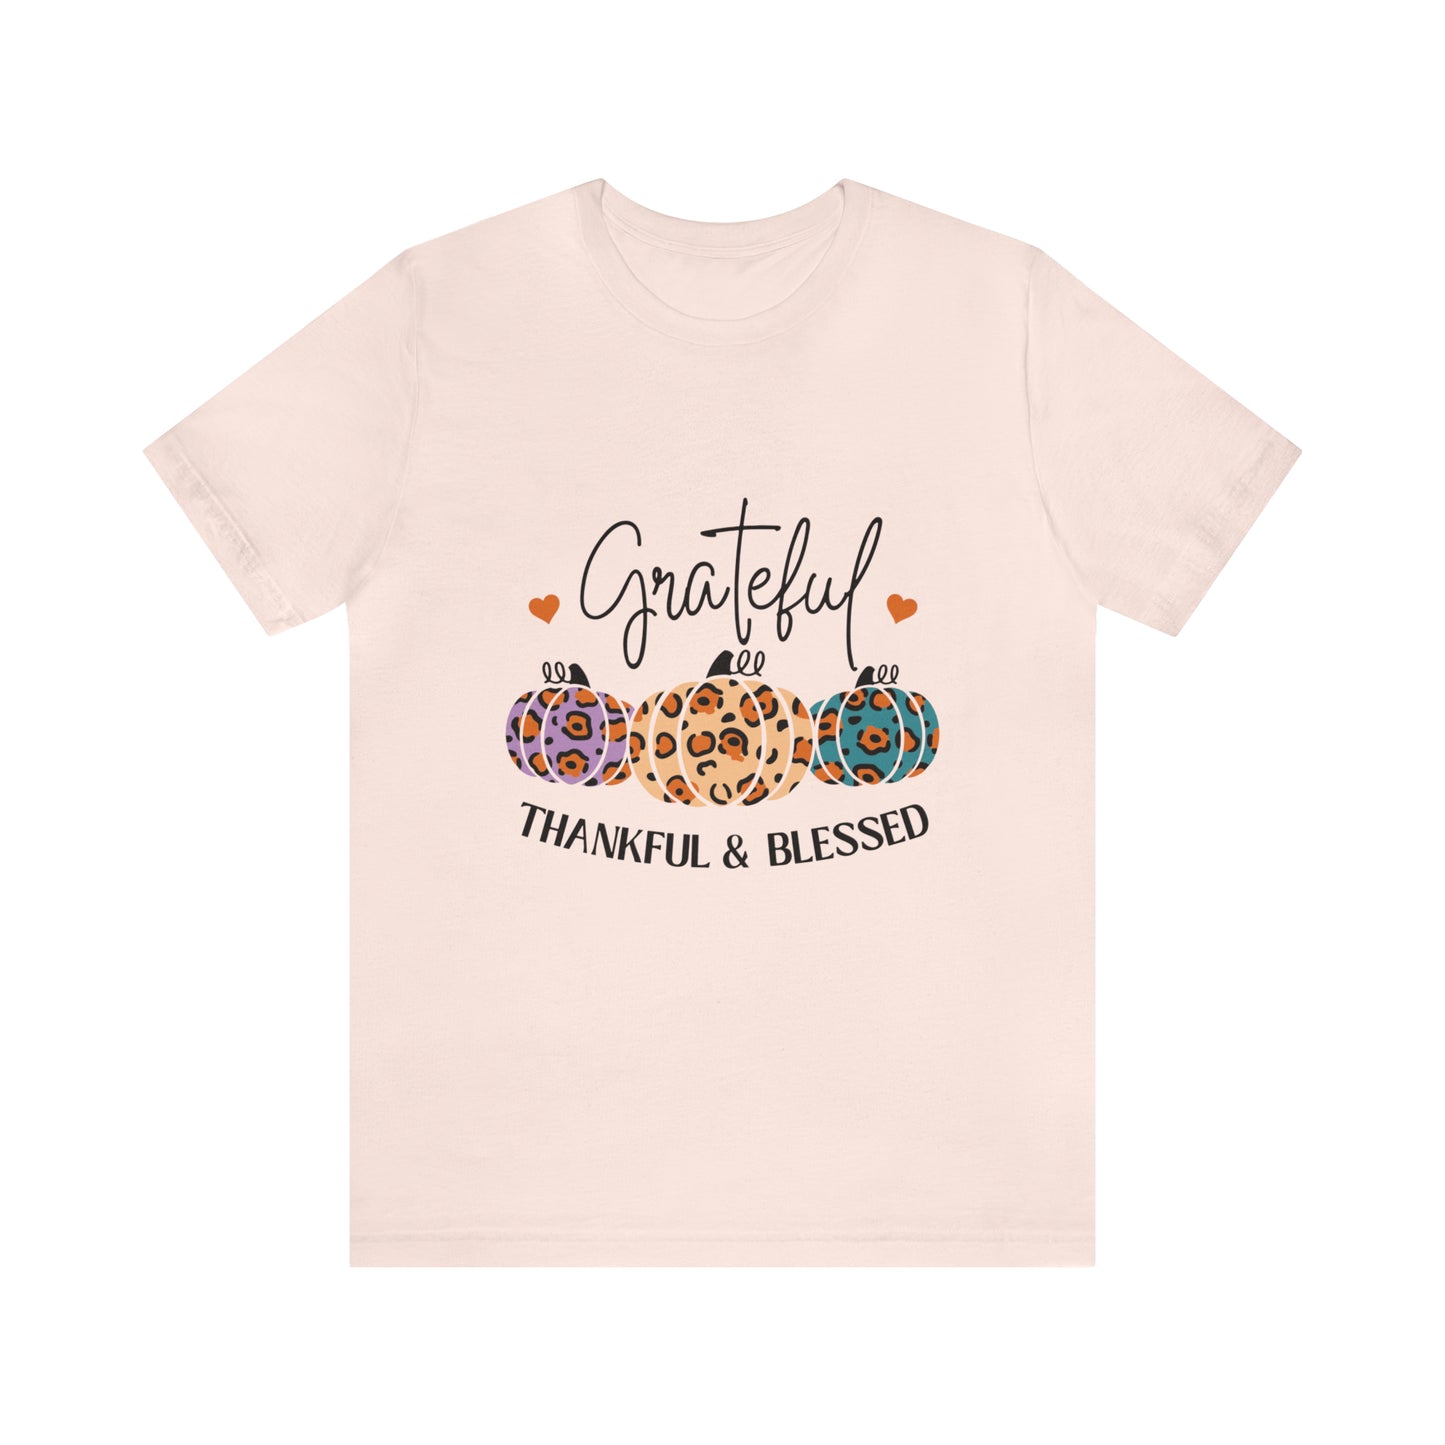 Grateful Thankful and Blessed - Jersey Short Sleeve T-Shirt